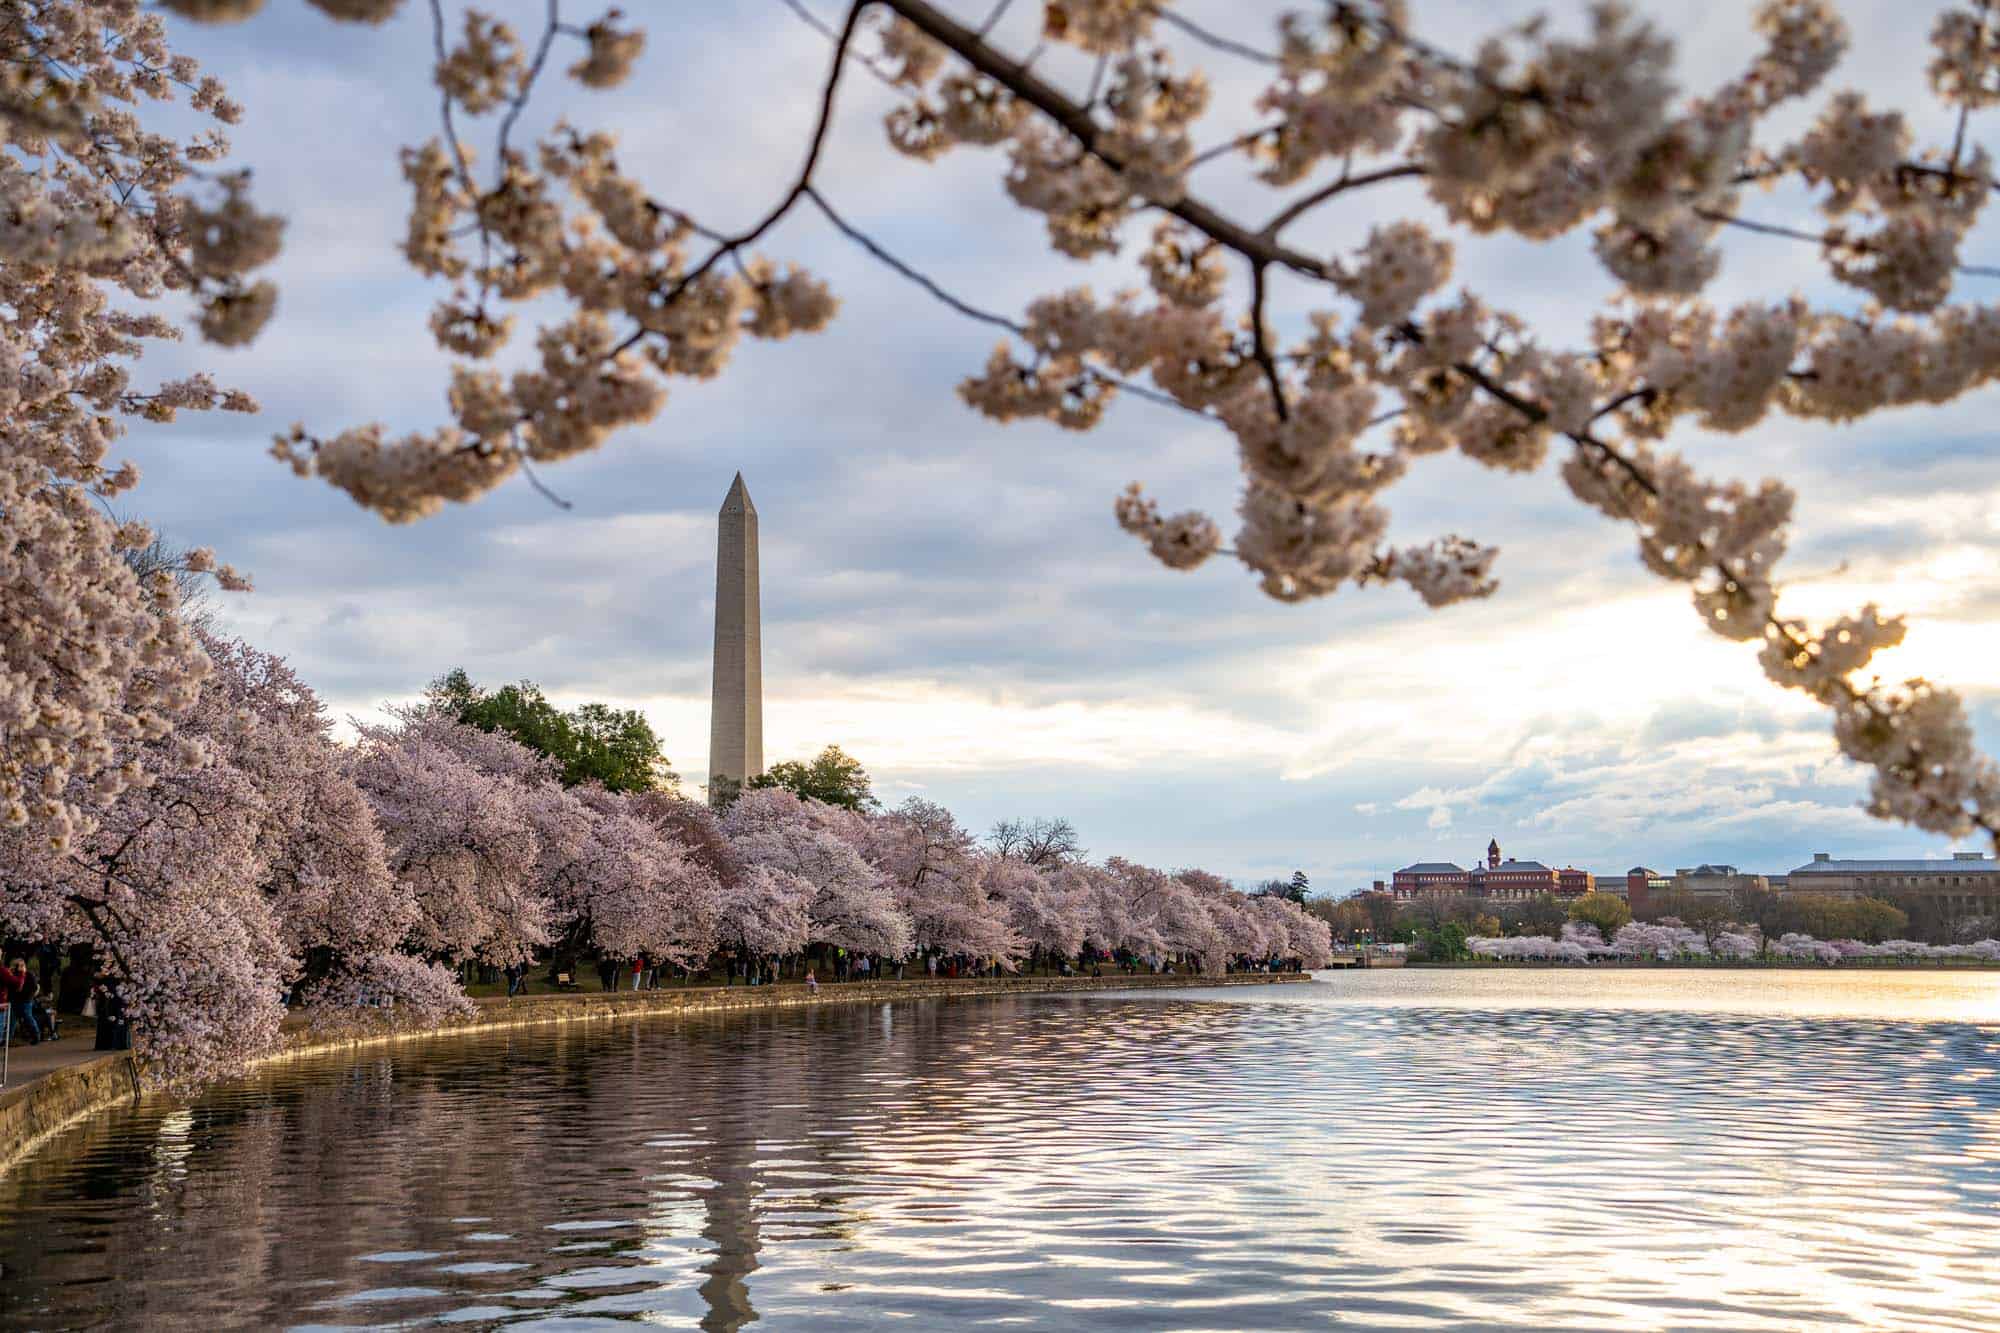 Cherry blossoms at the Tidal Basin in DC